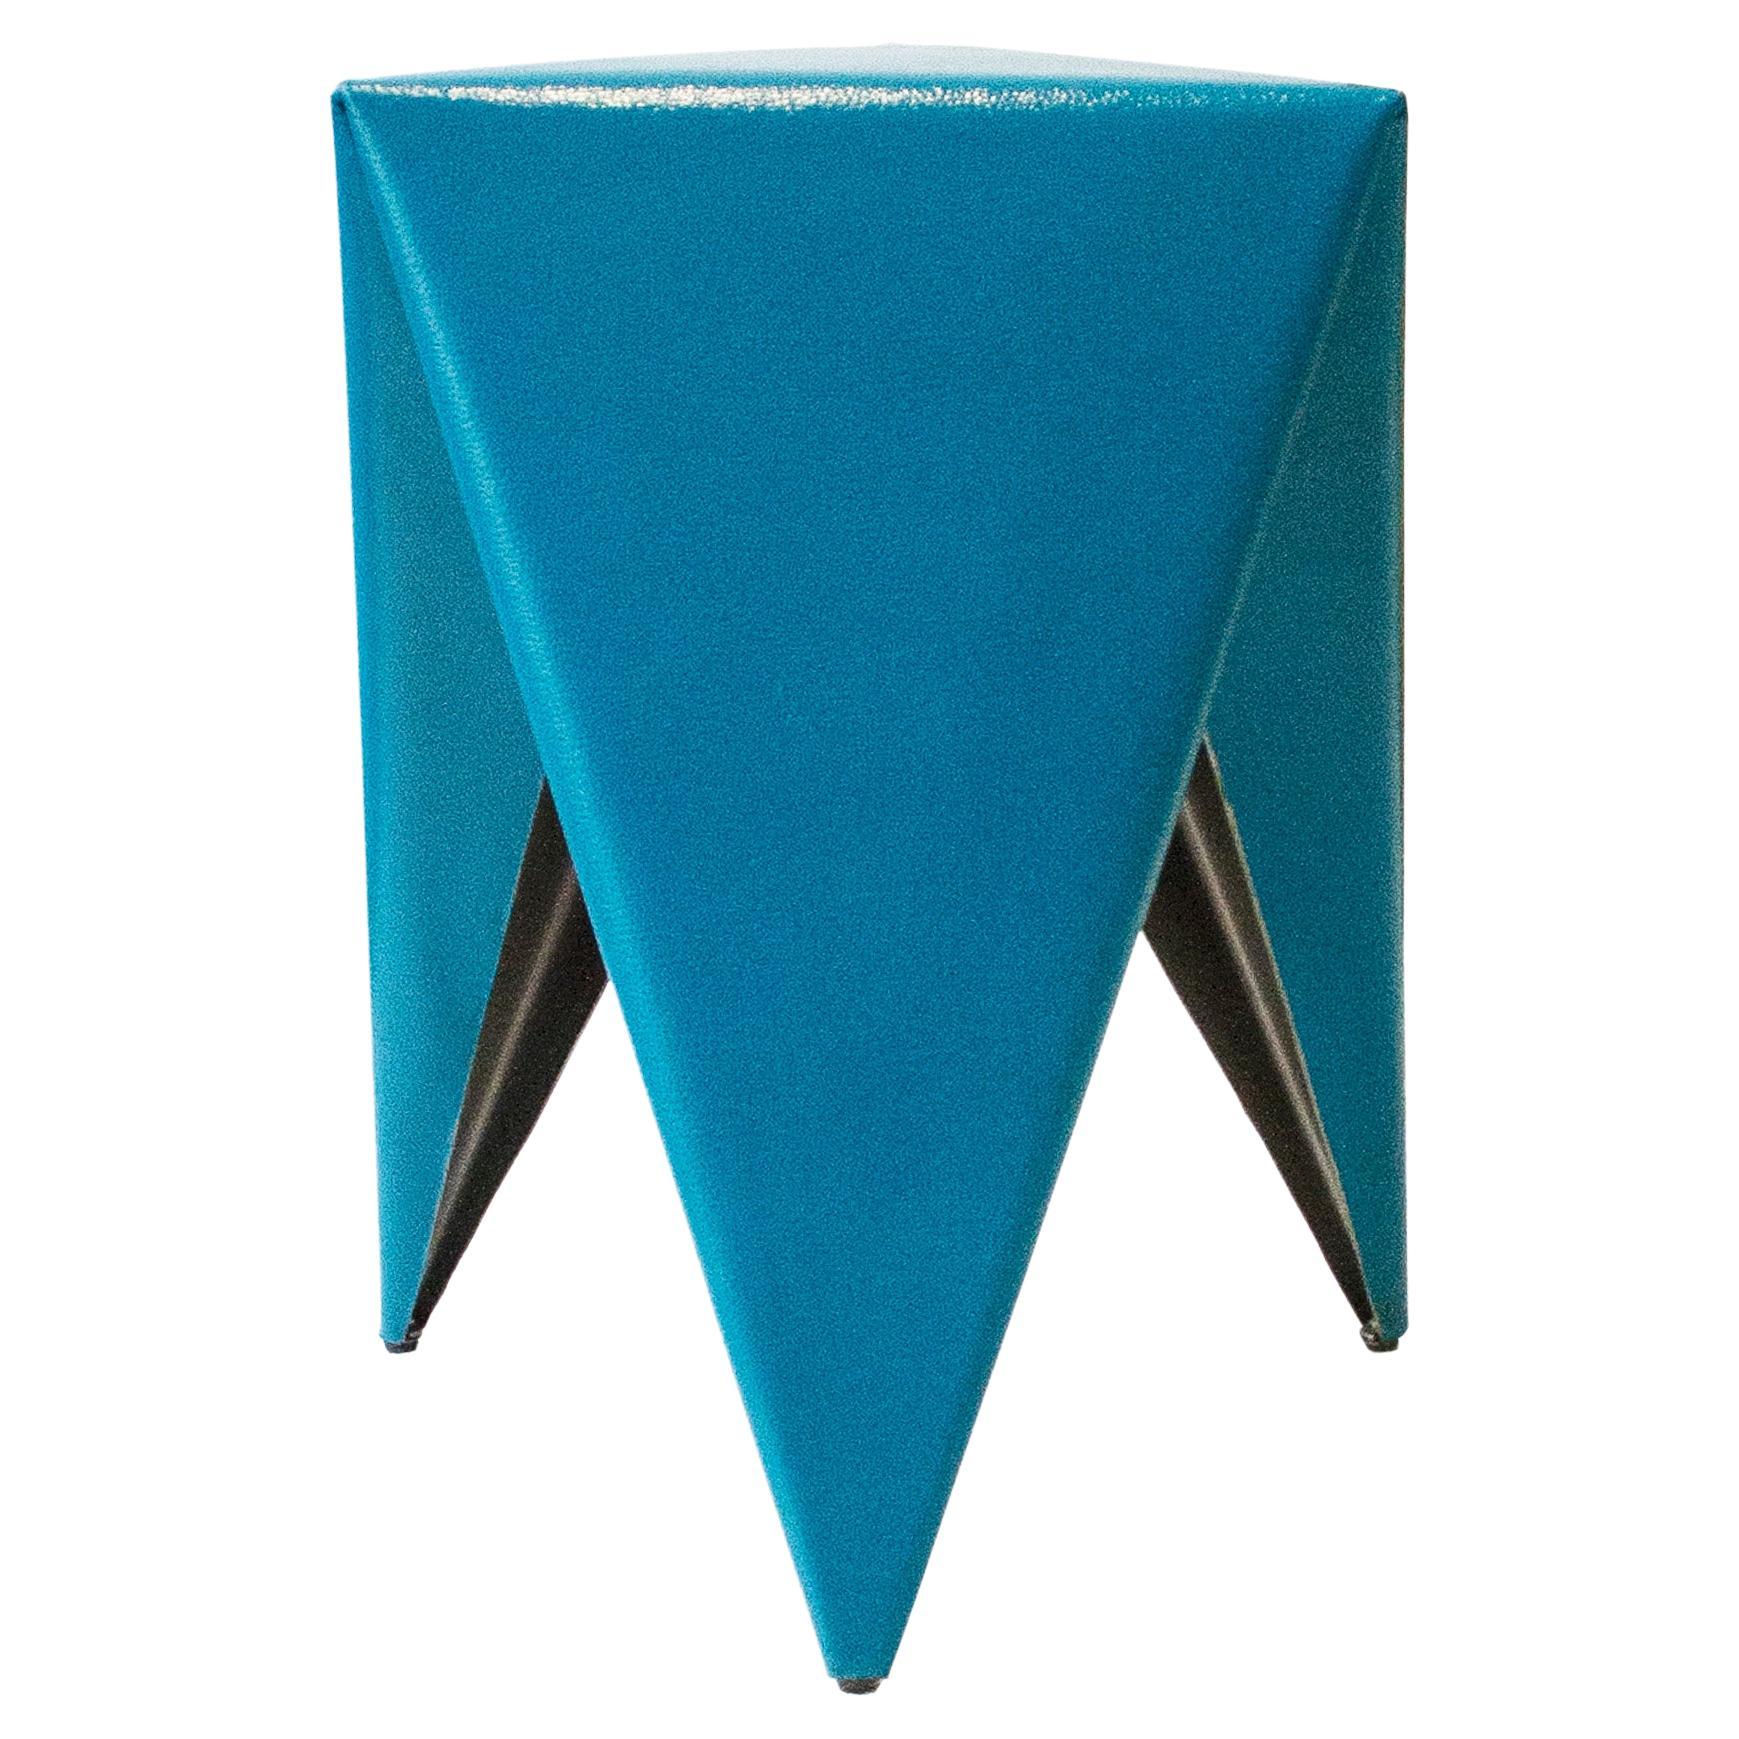 Modern Stool & Sidetable "Tripy" Designed by Laurent Dif, Spain, 2000 For Sale